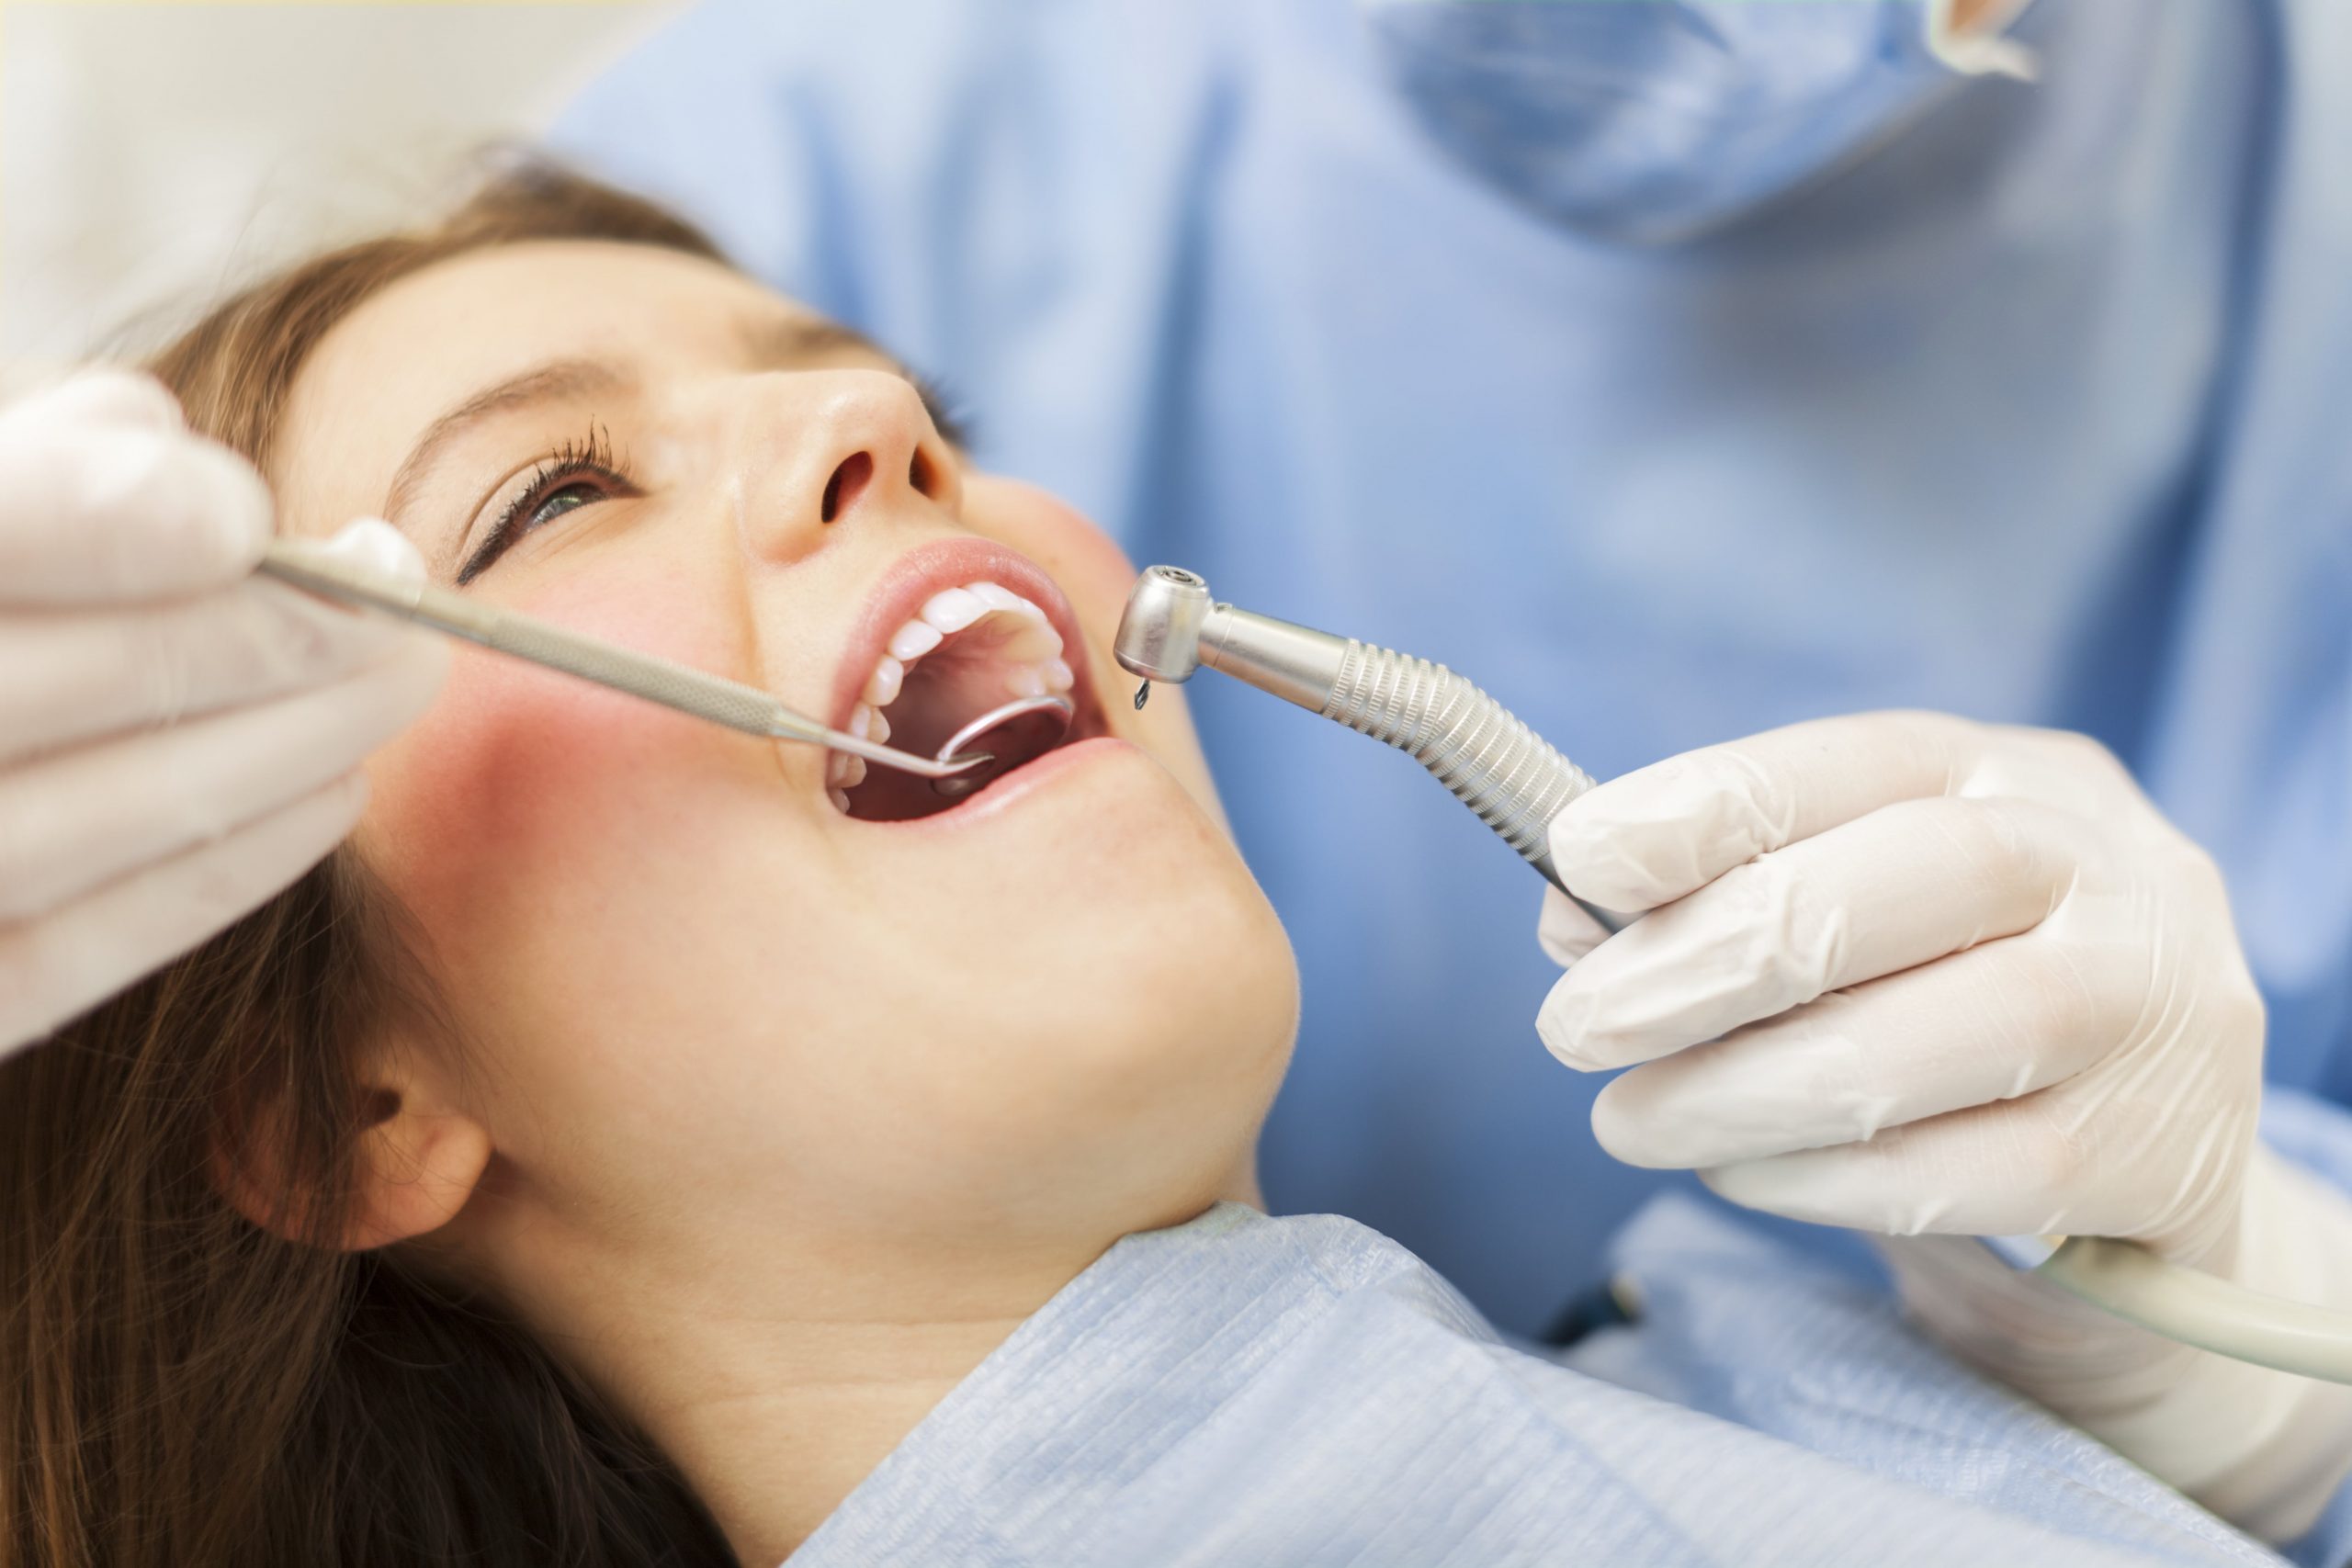 A woman is getting her teeth cleaned at the dentist - Dentist